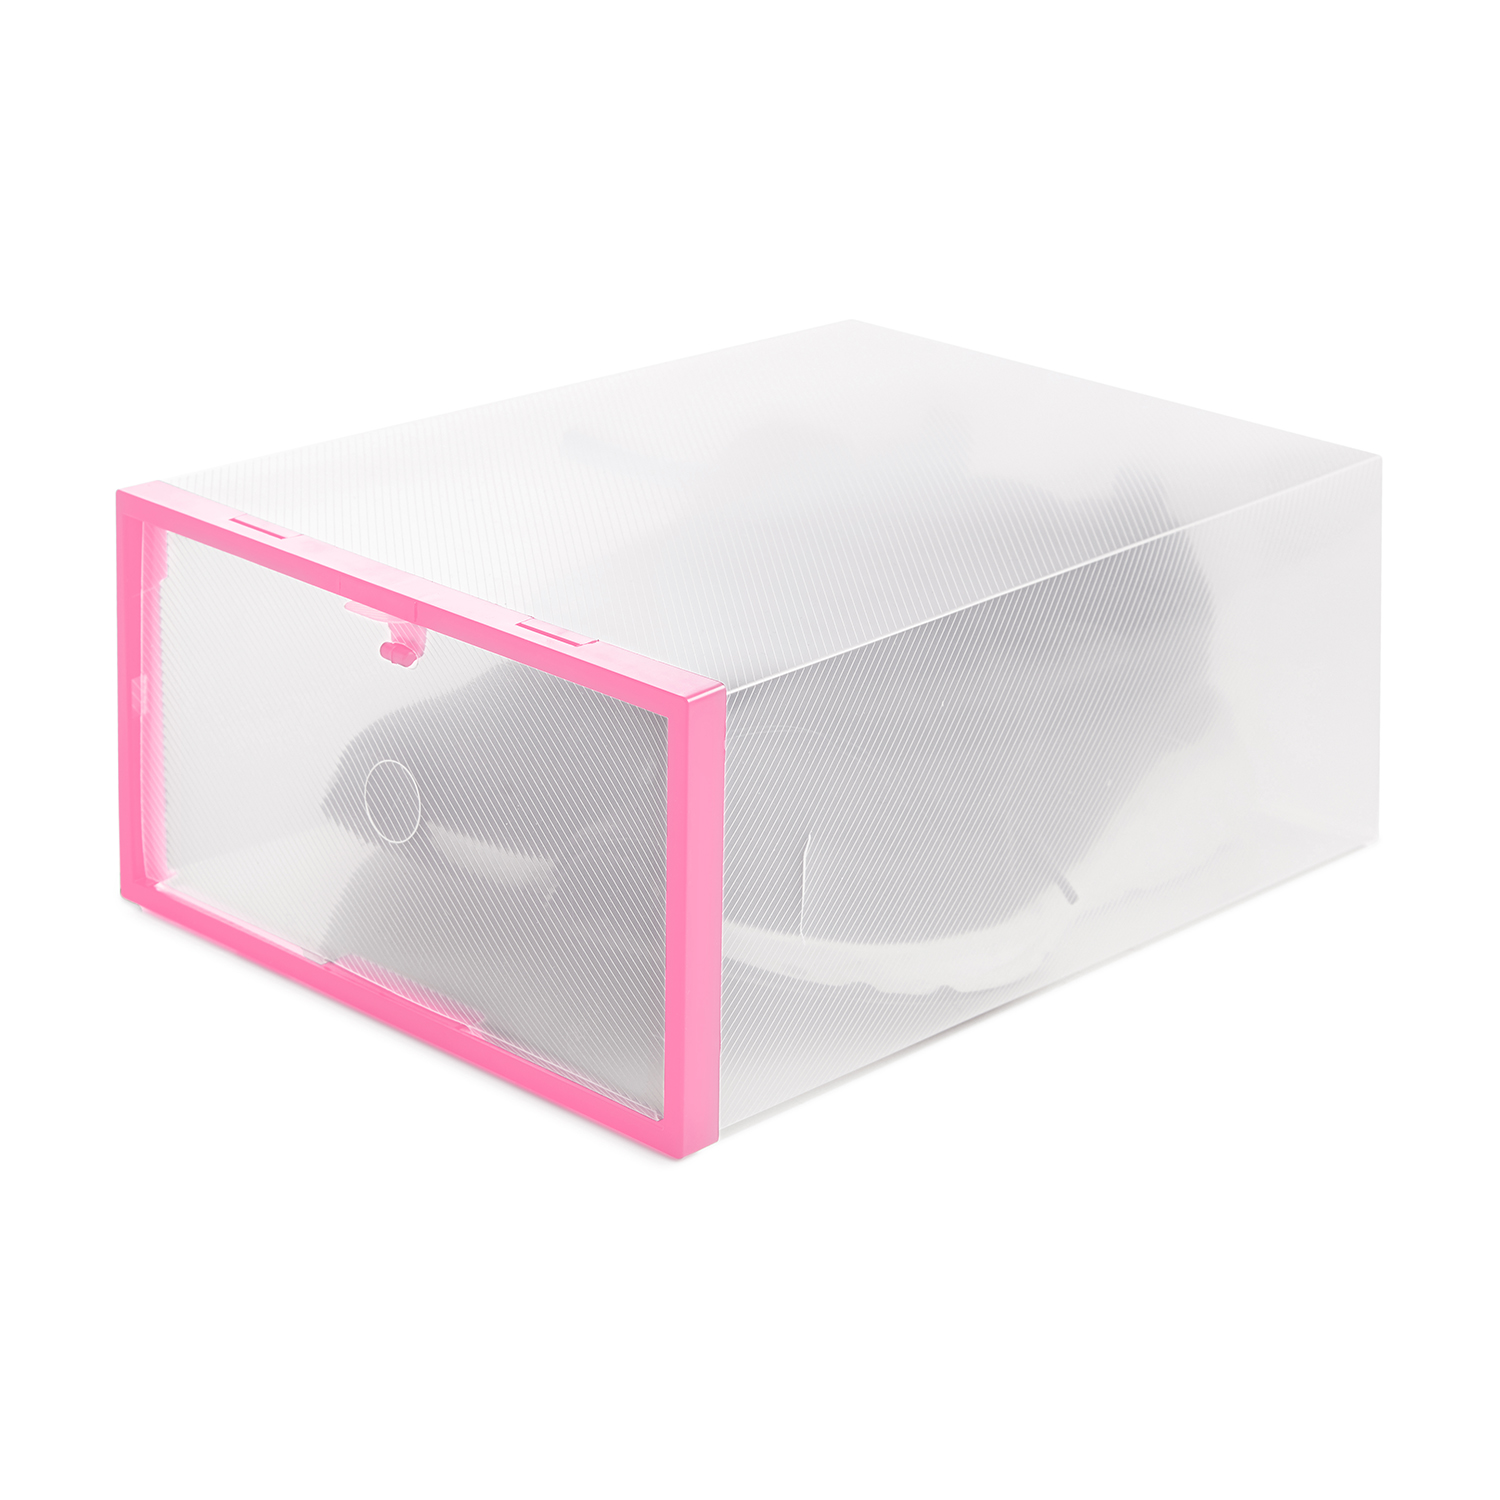 Lady's Shoe Box 2 Pack Pink - Home 